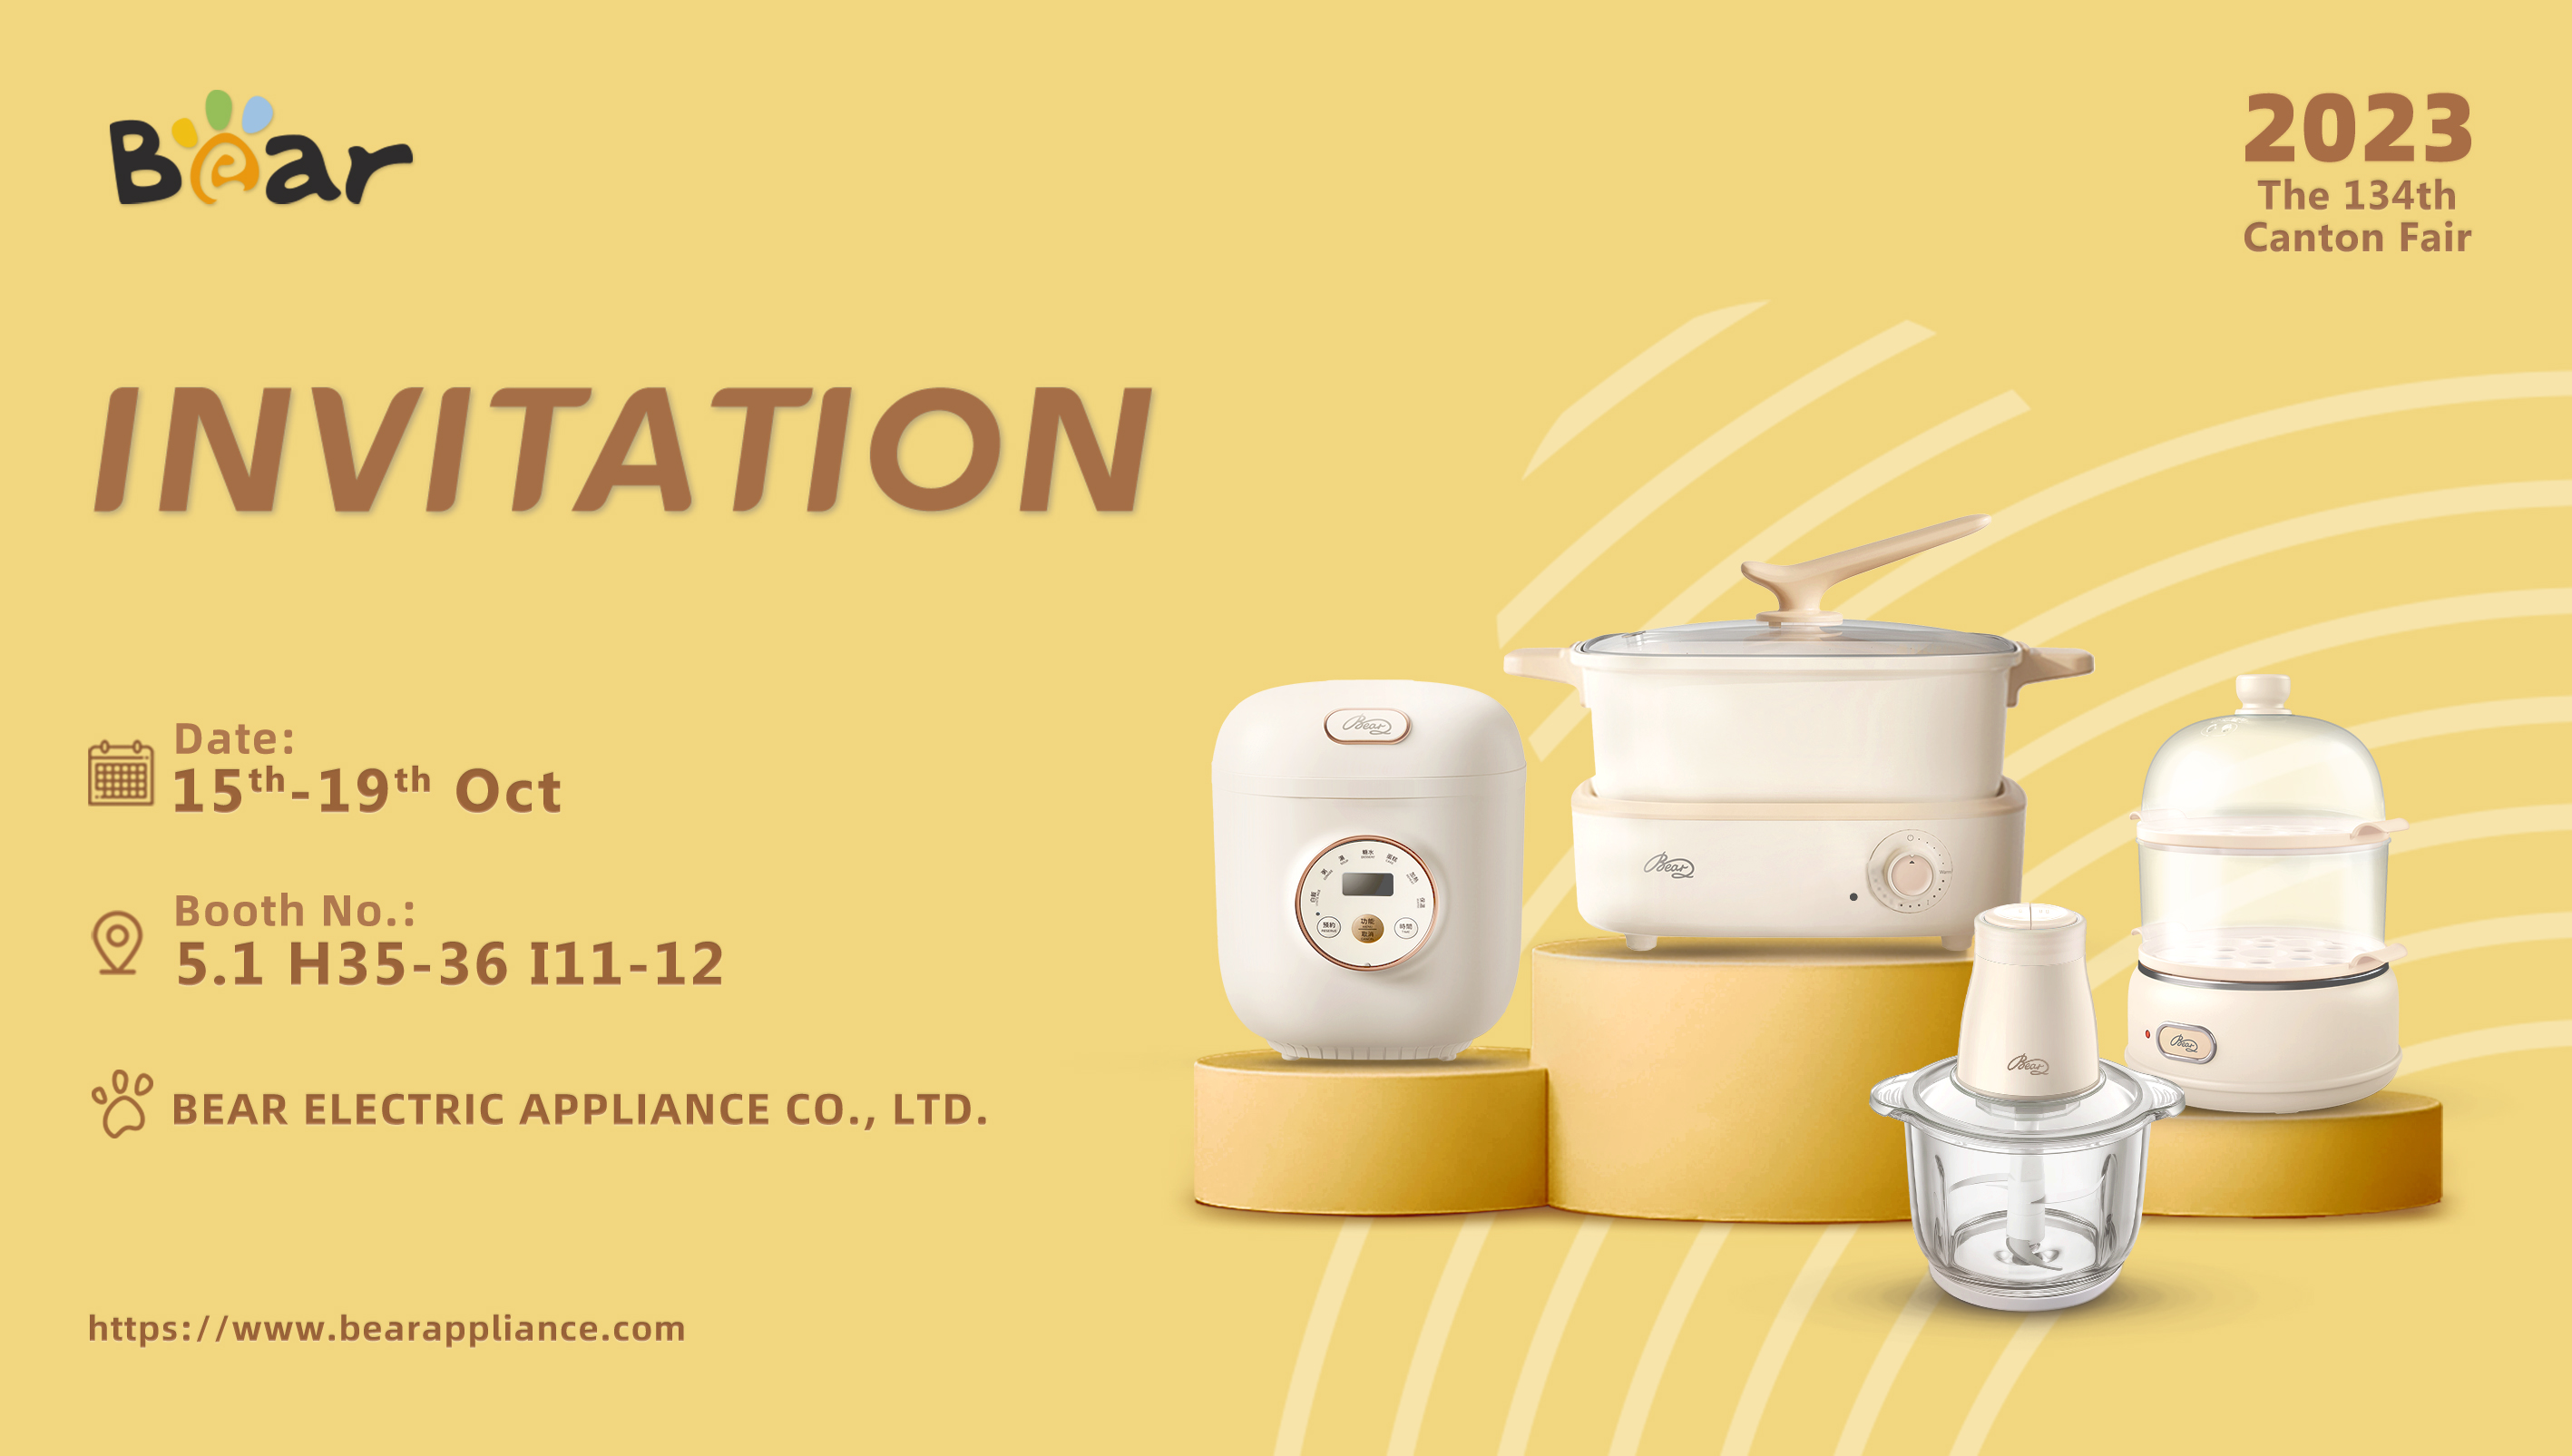 Invitation to Visit Bear Electric Appliance at the 134th Canton Fair